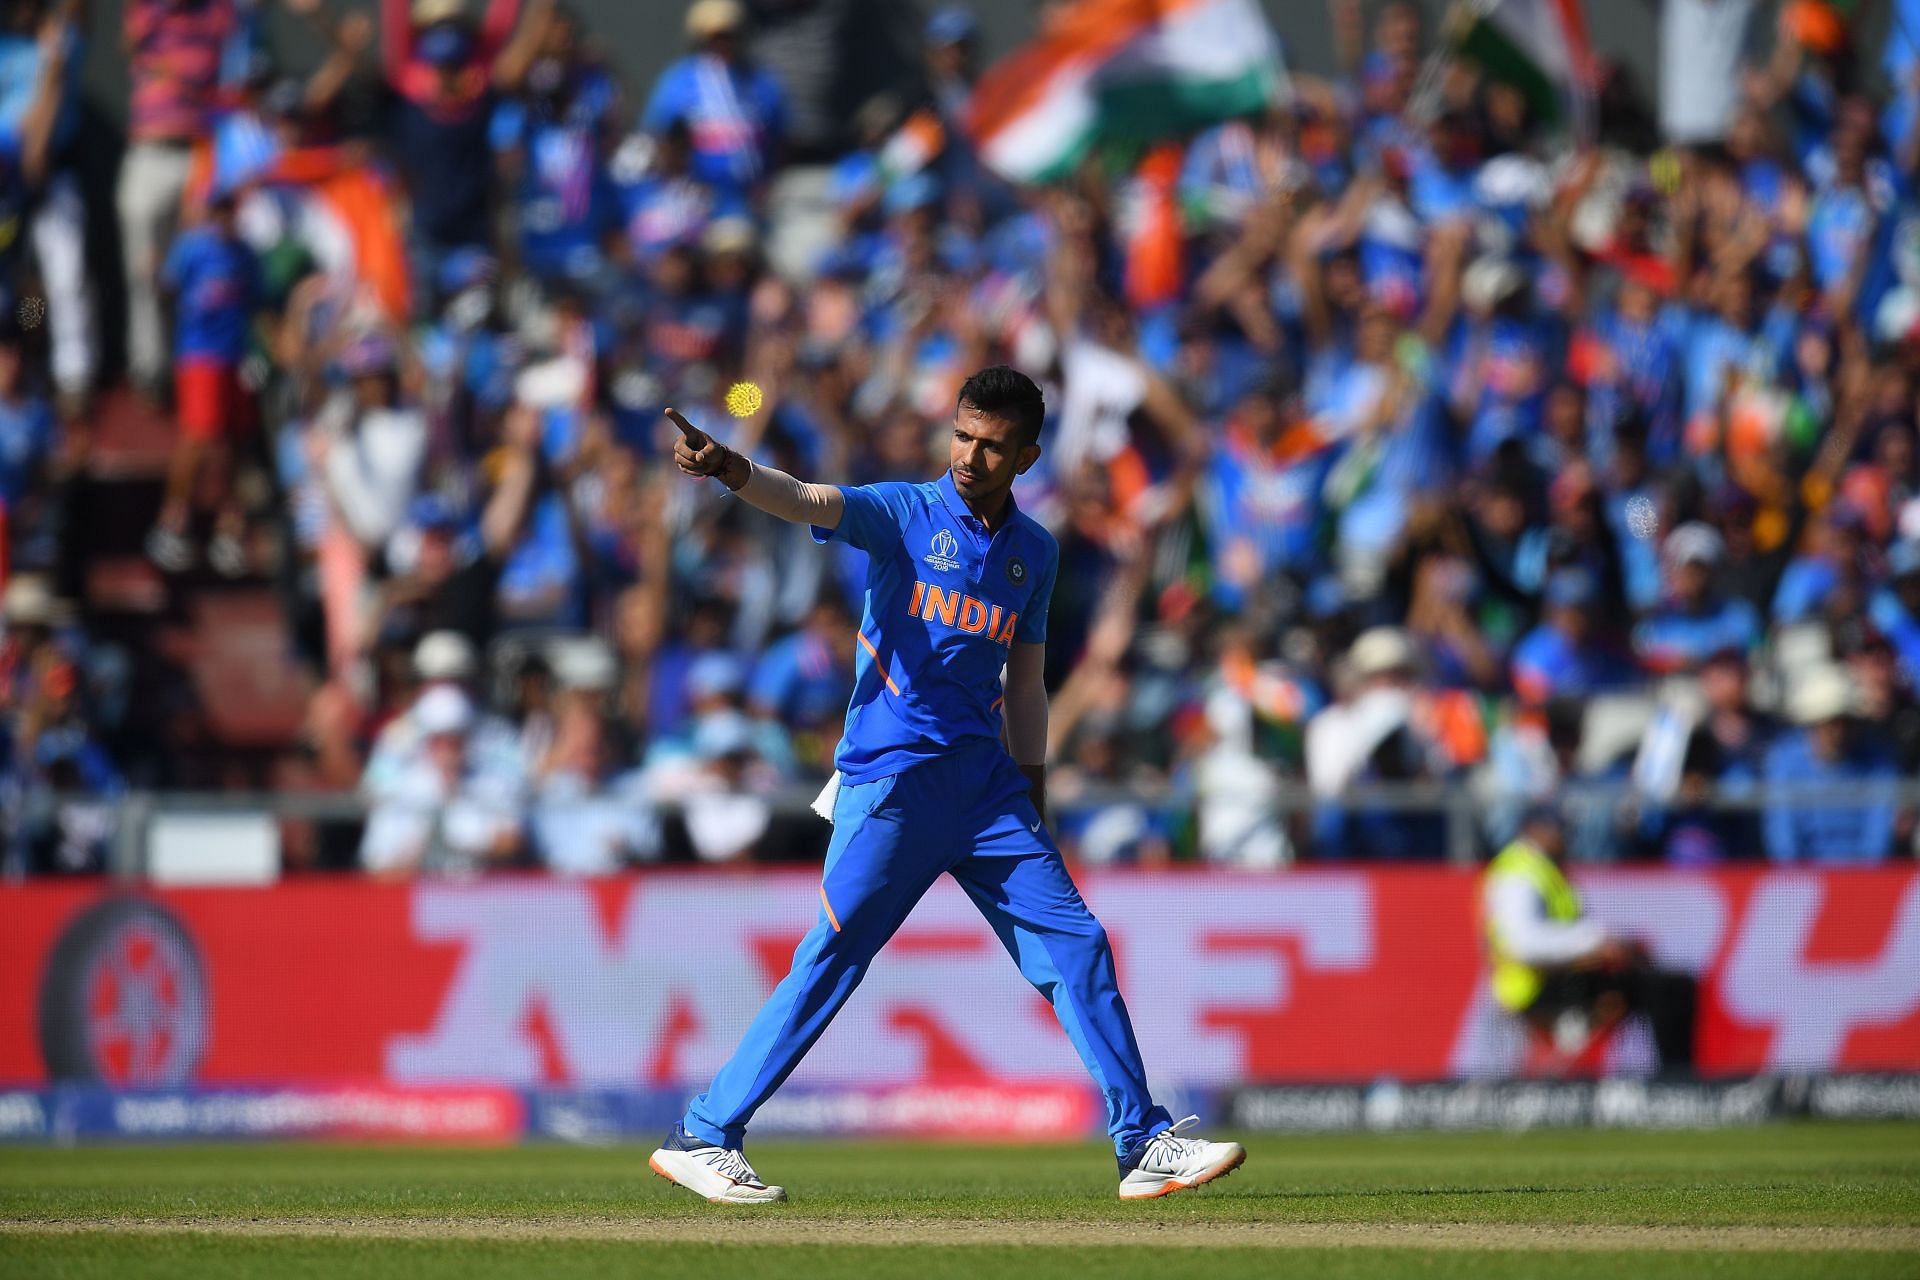 Chahal celebrates: West Indies v India - ICC Cricket World Cup 2019